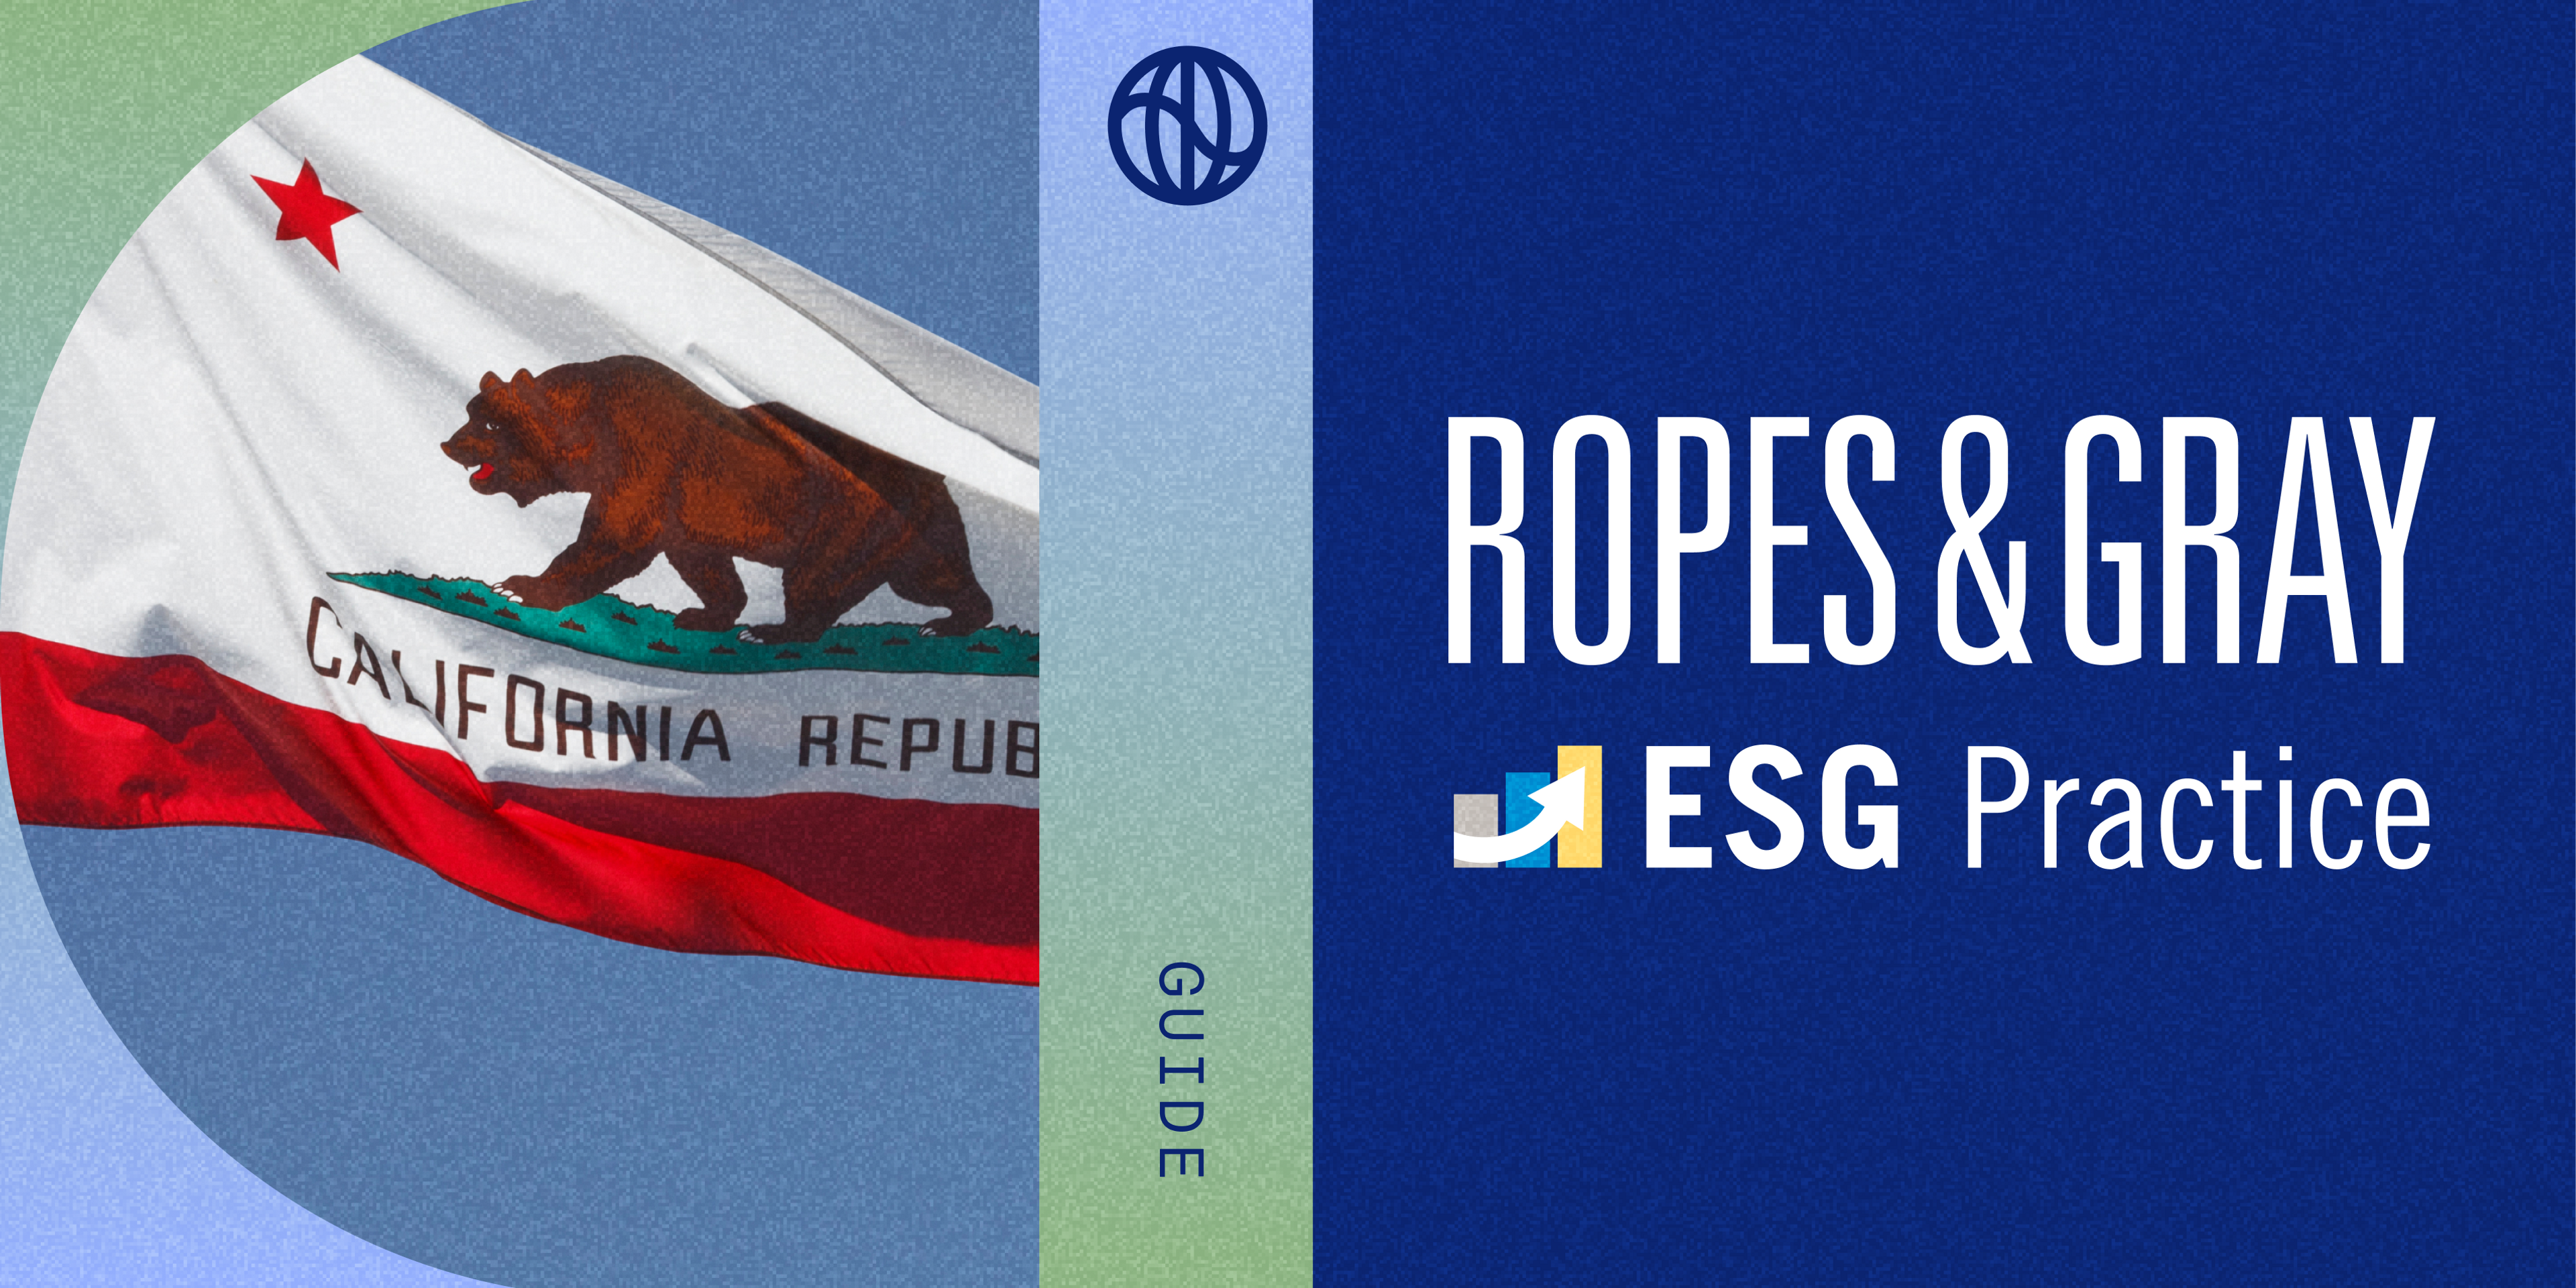 ropes and grey logo with the California flag, watershed logo and text: Guide